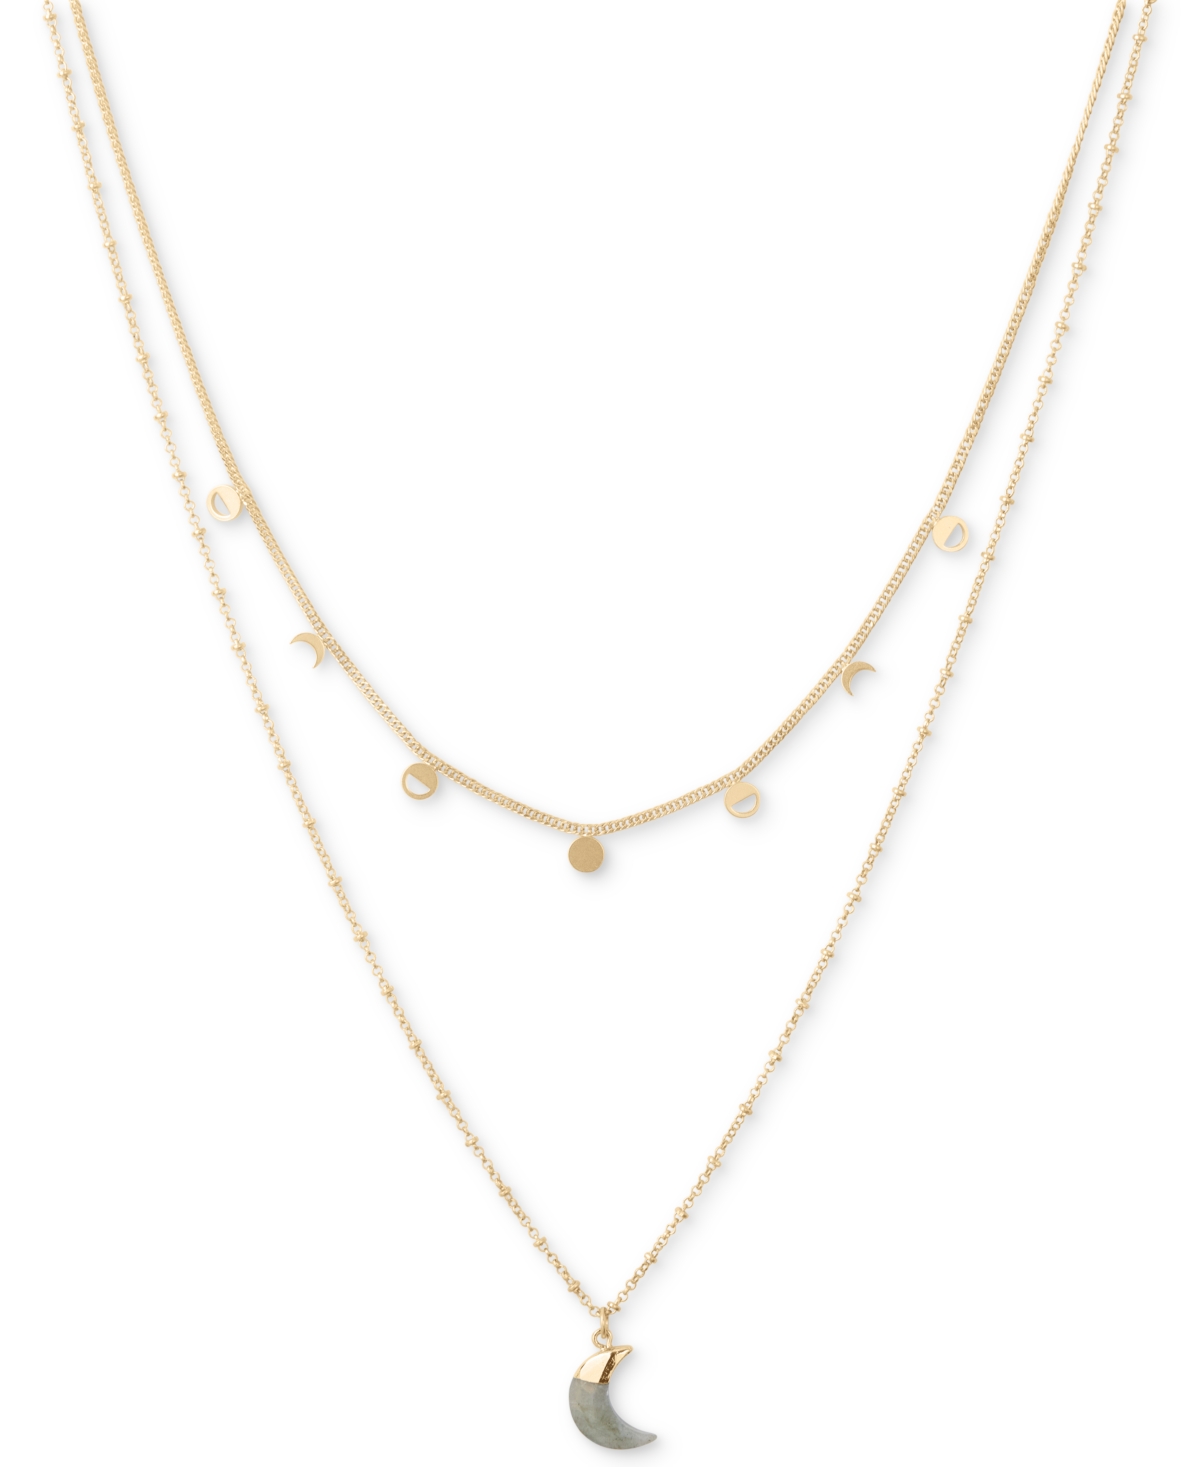 Lucky Brand Gold-tone Gemstone Moon & Phase Charm Layered Pendant Necklace, 16" + 2" Extender